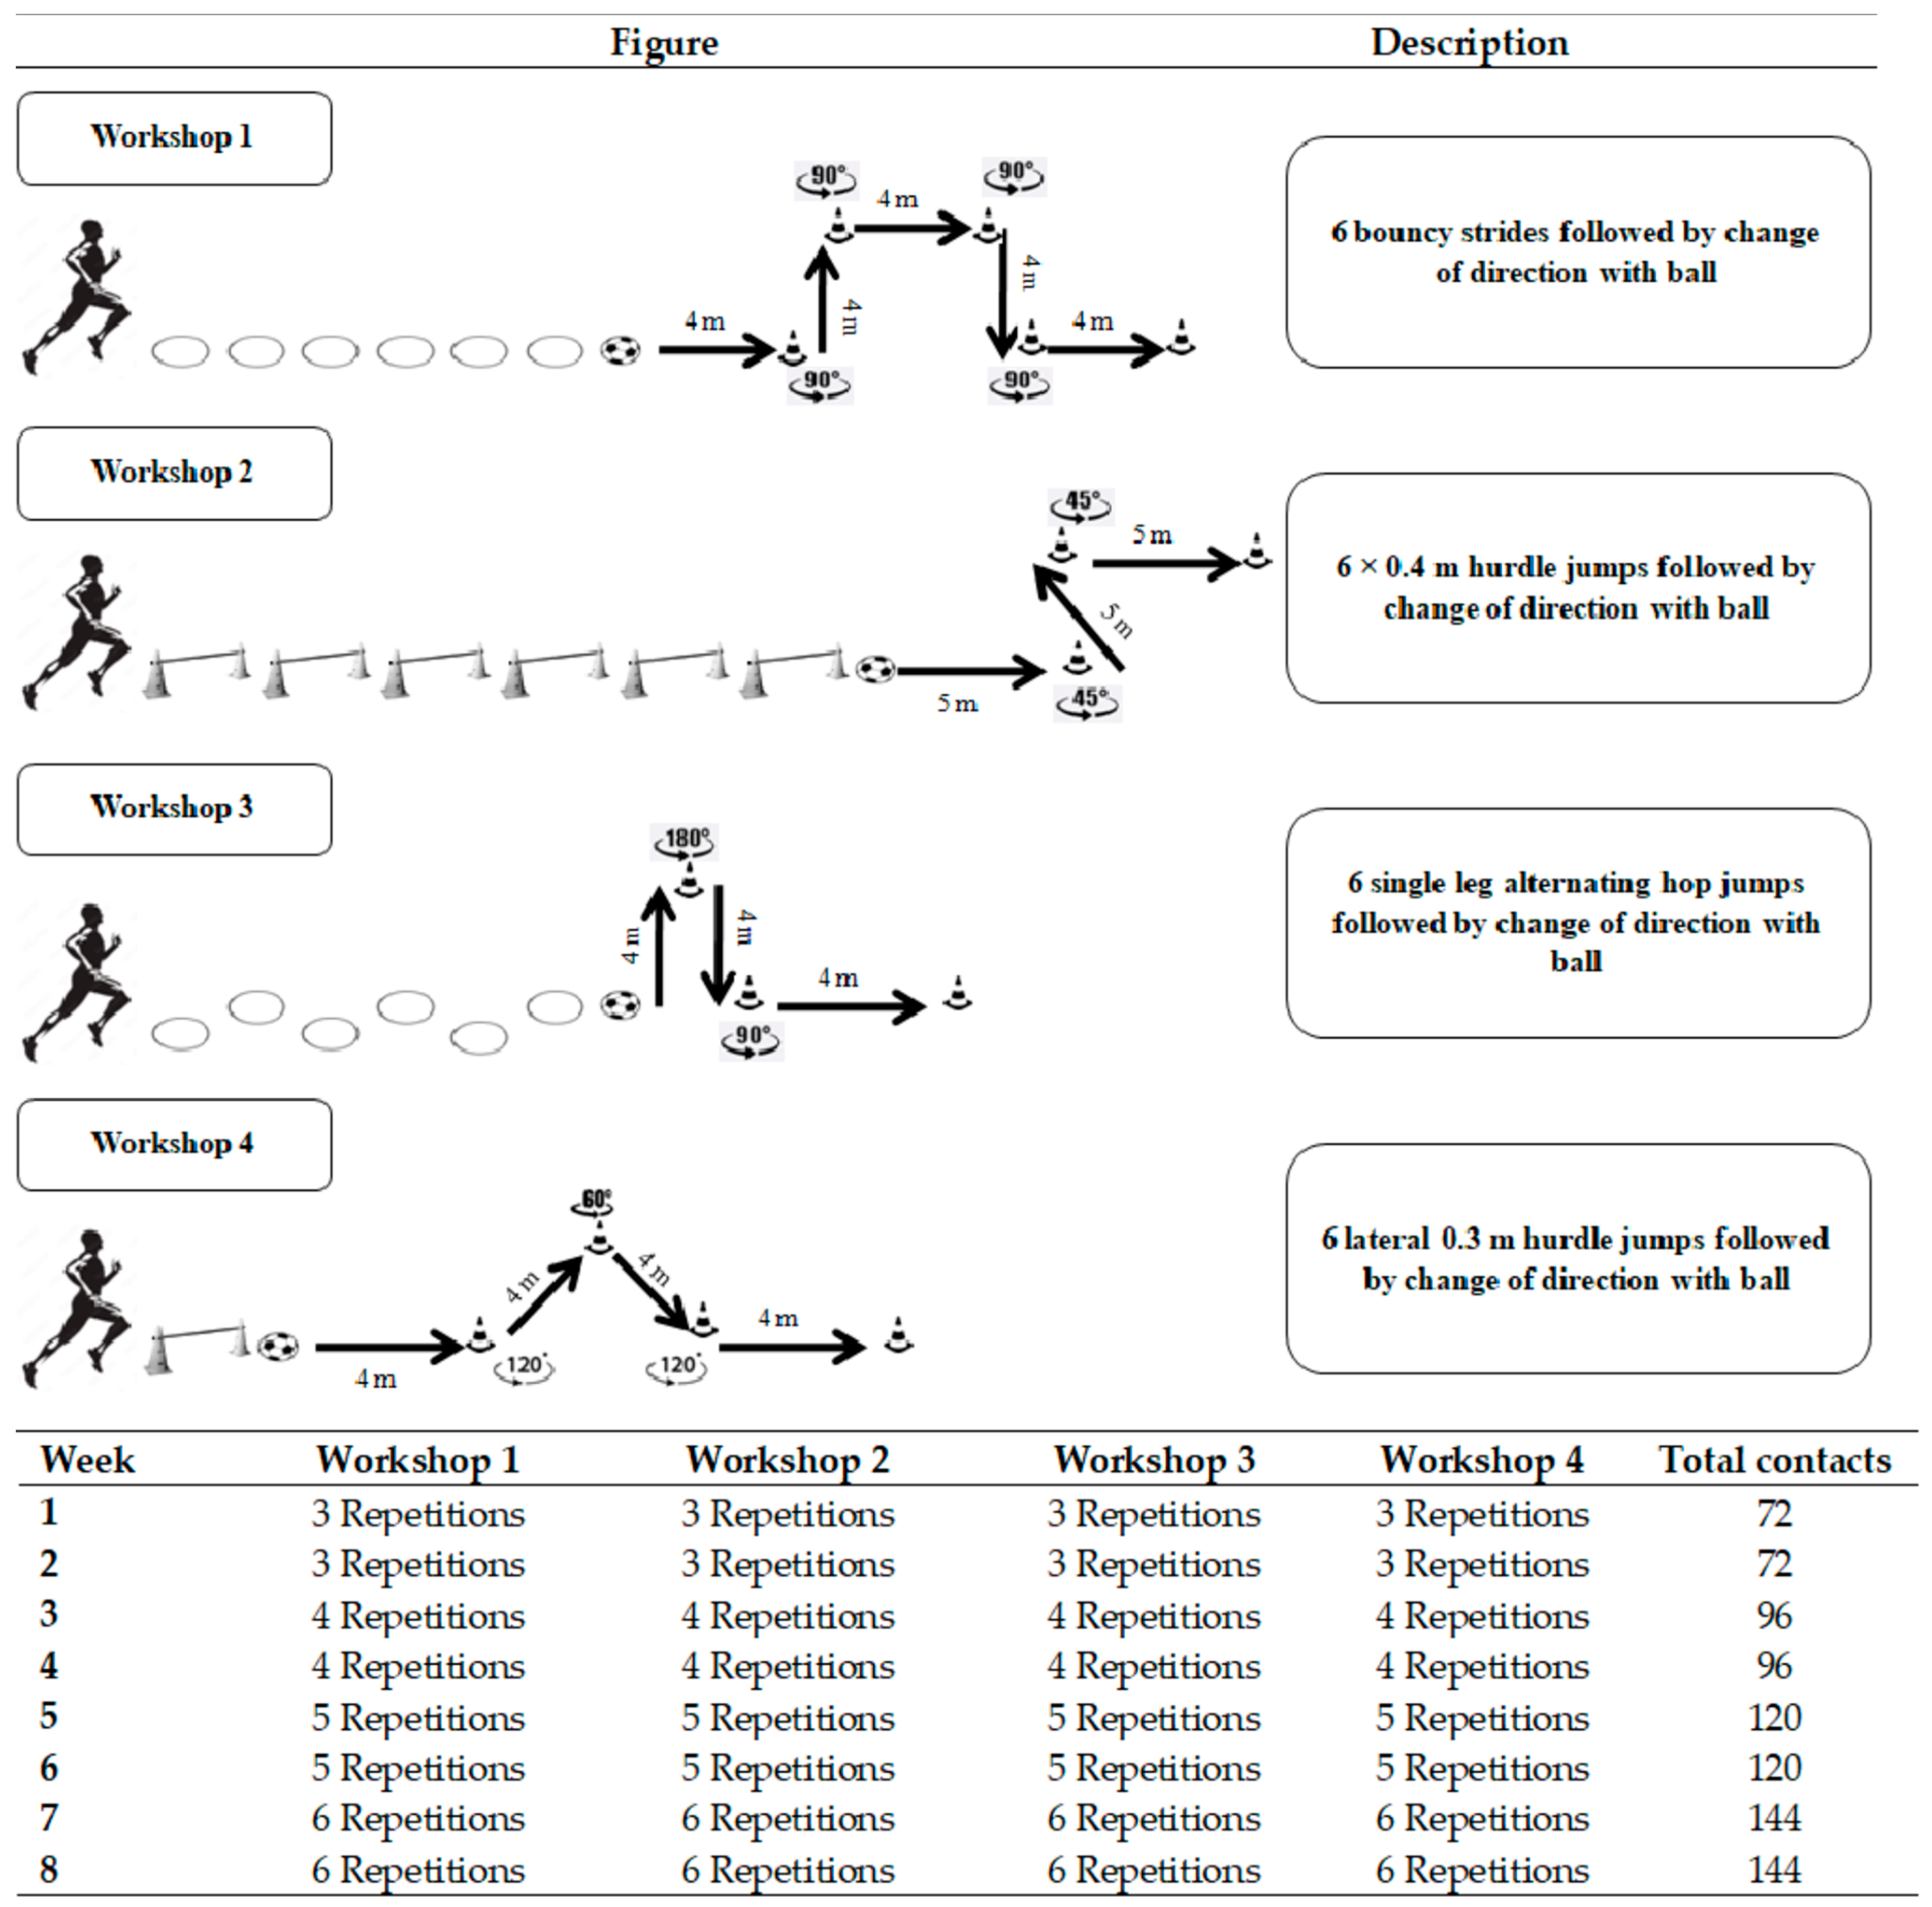 Biology Free Full-Text Effects of Biological Age on Athletic Adaptations to Combined Plyometric and Sprint with Change of Direction with Ball Training in Youth Soccer Players